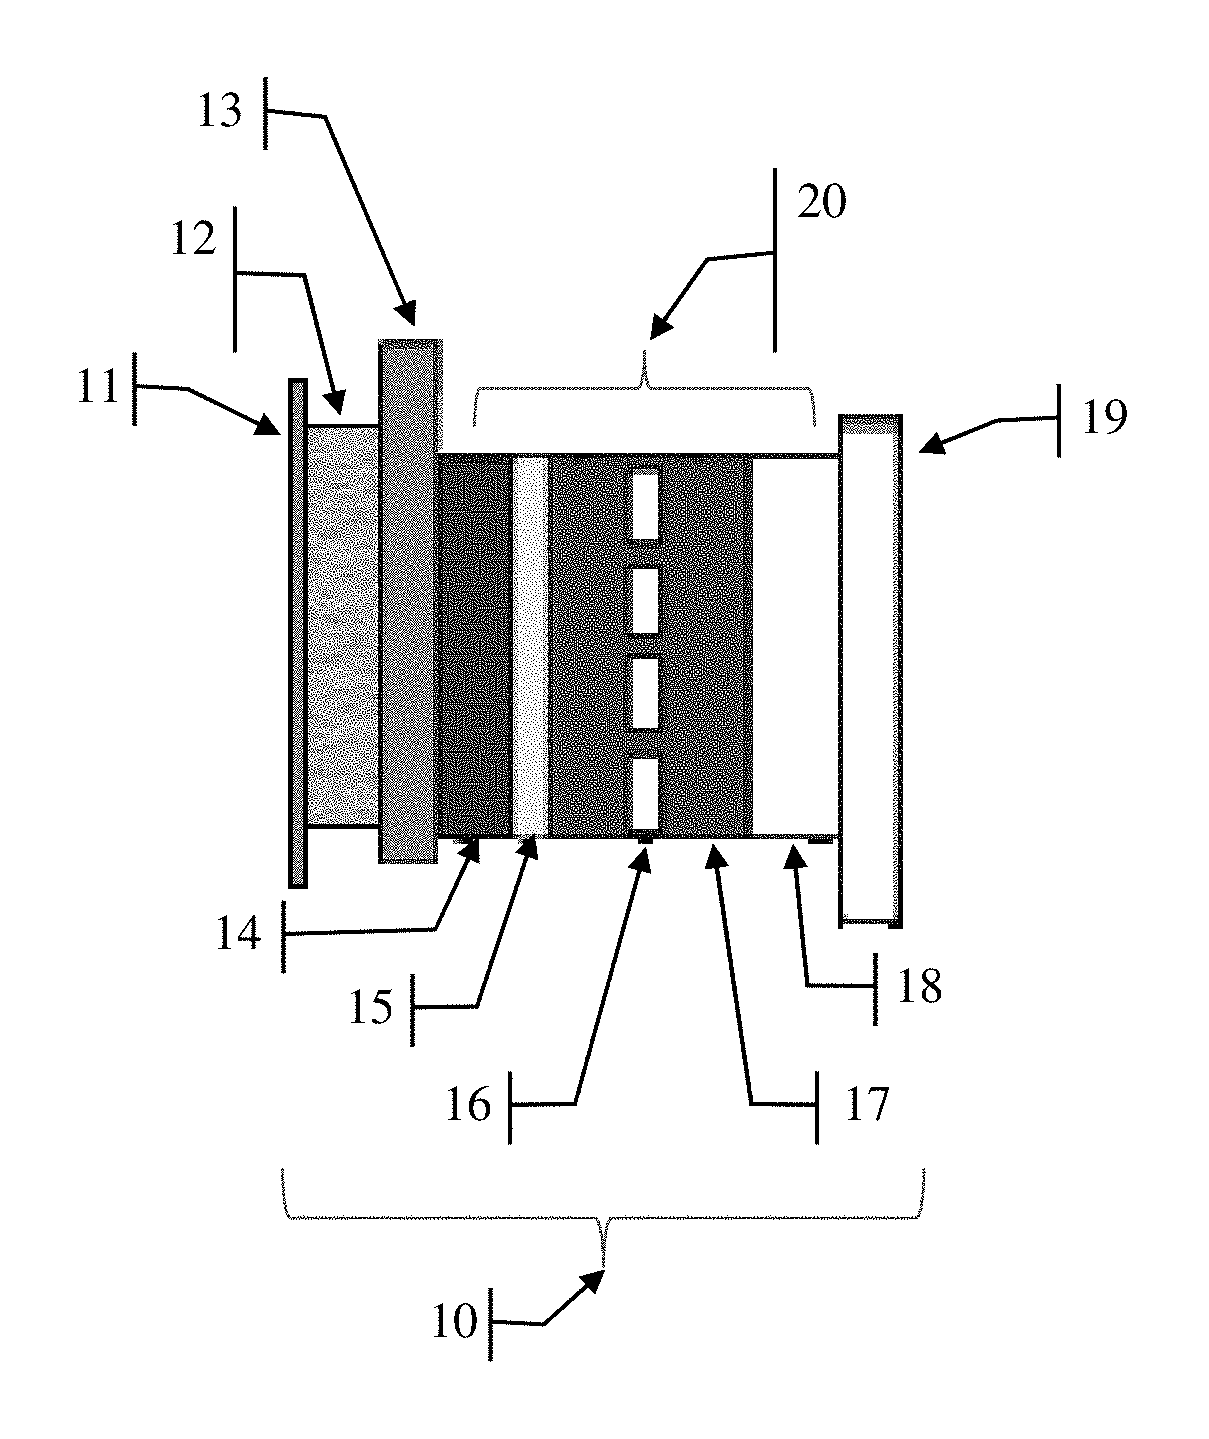 Self-recharging direct conversion electrical energy storage device and method